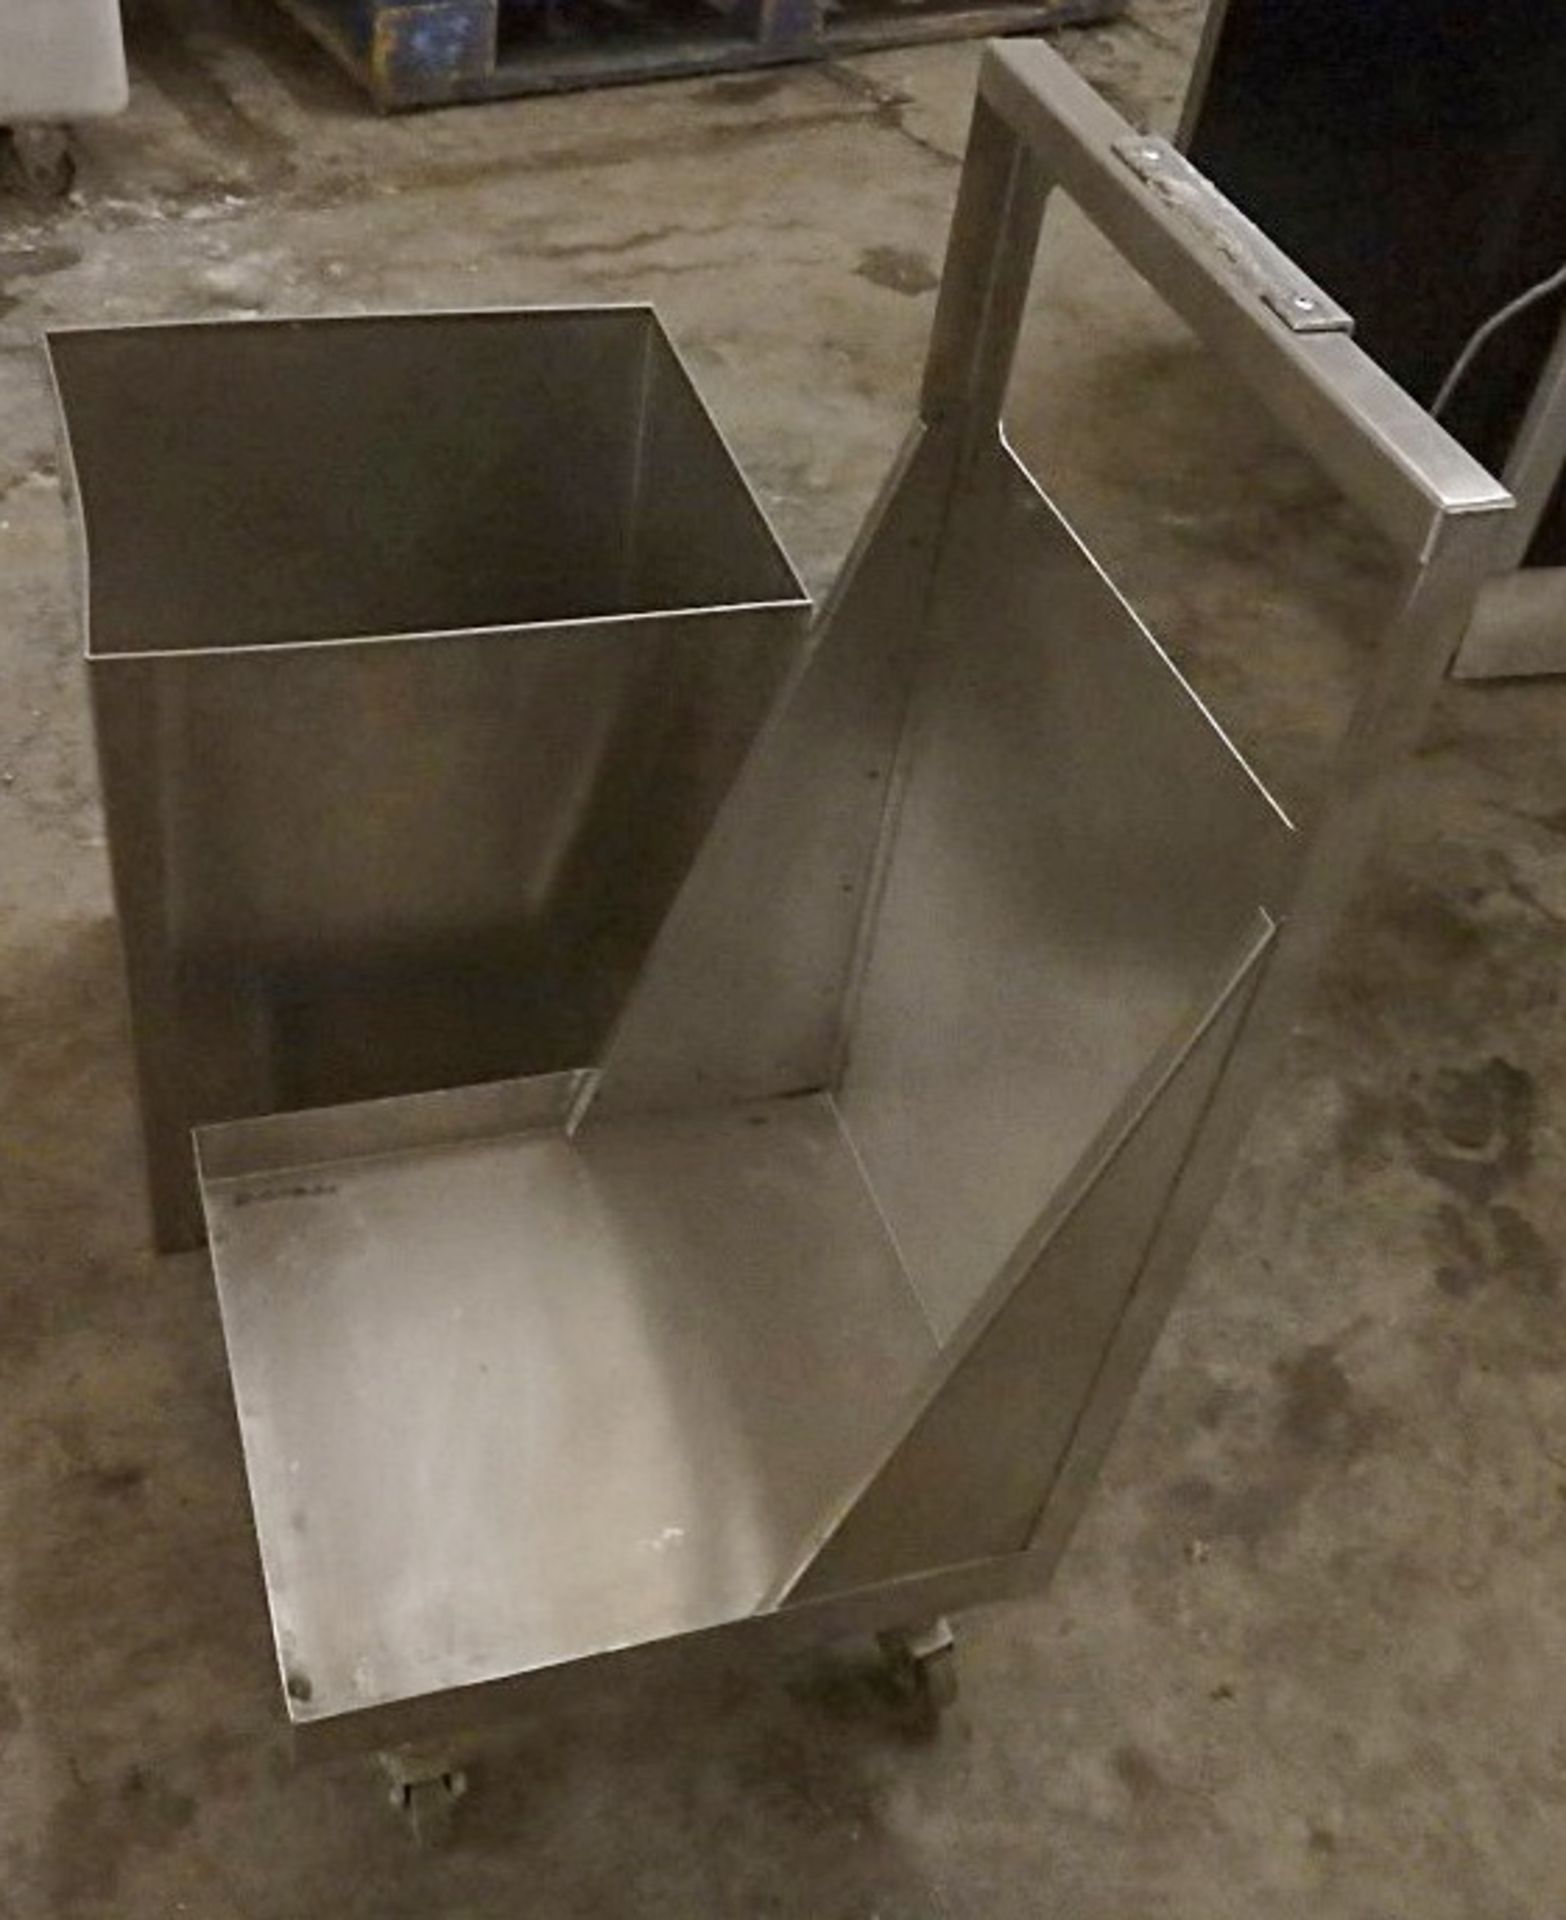 1 x Stainless Steel Under The Counter Storage Container On Weeled Base - Lifts Out From Base For - Image 4 of 4